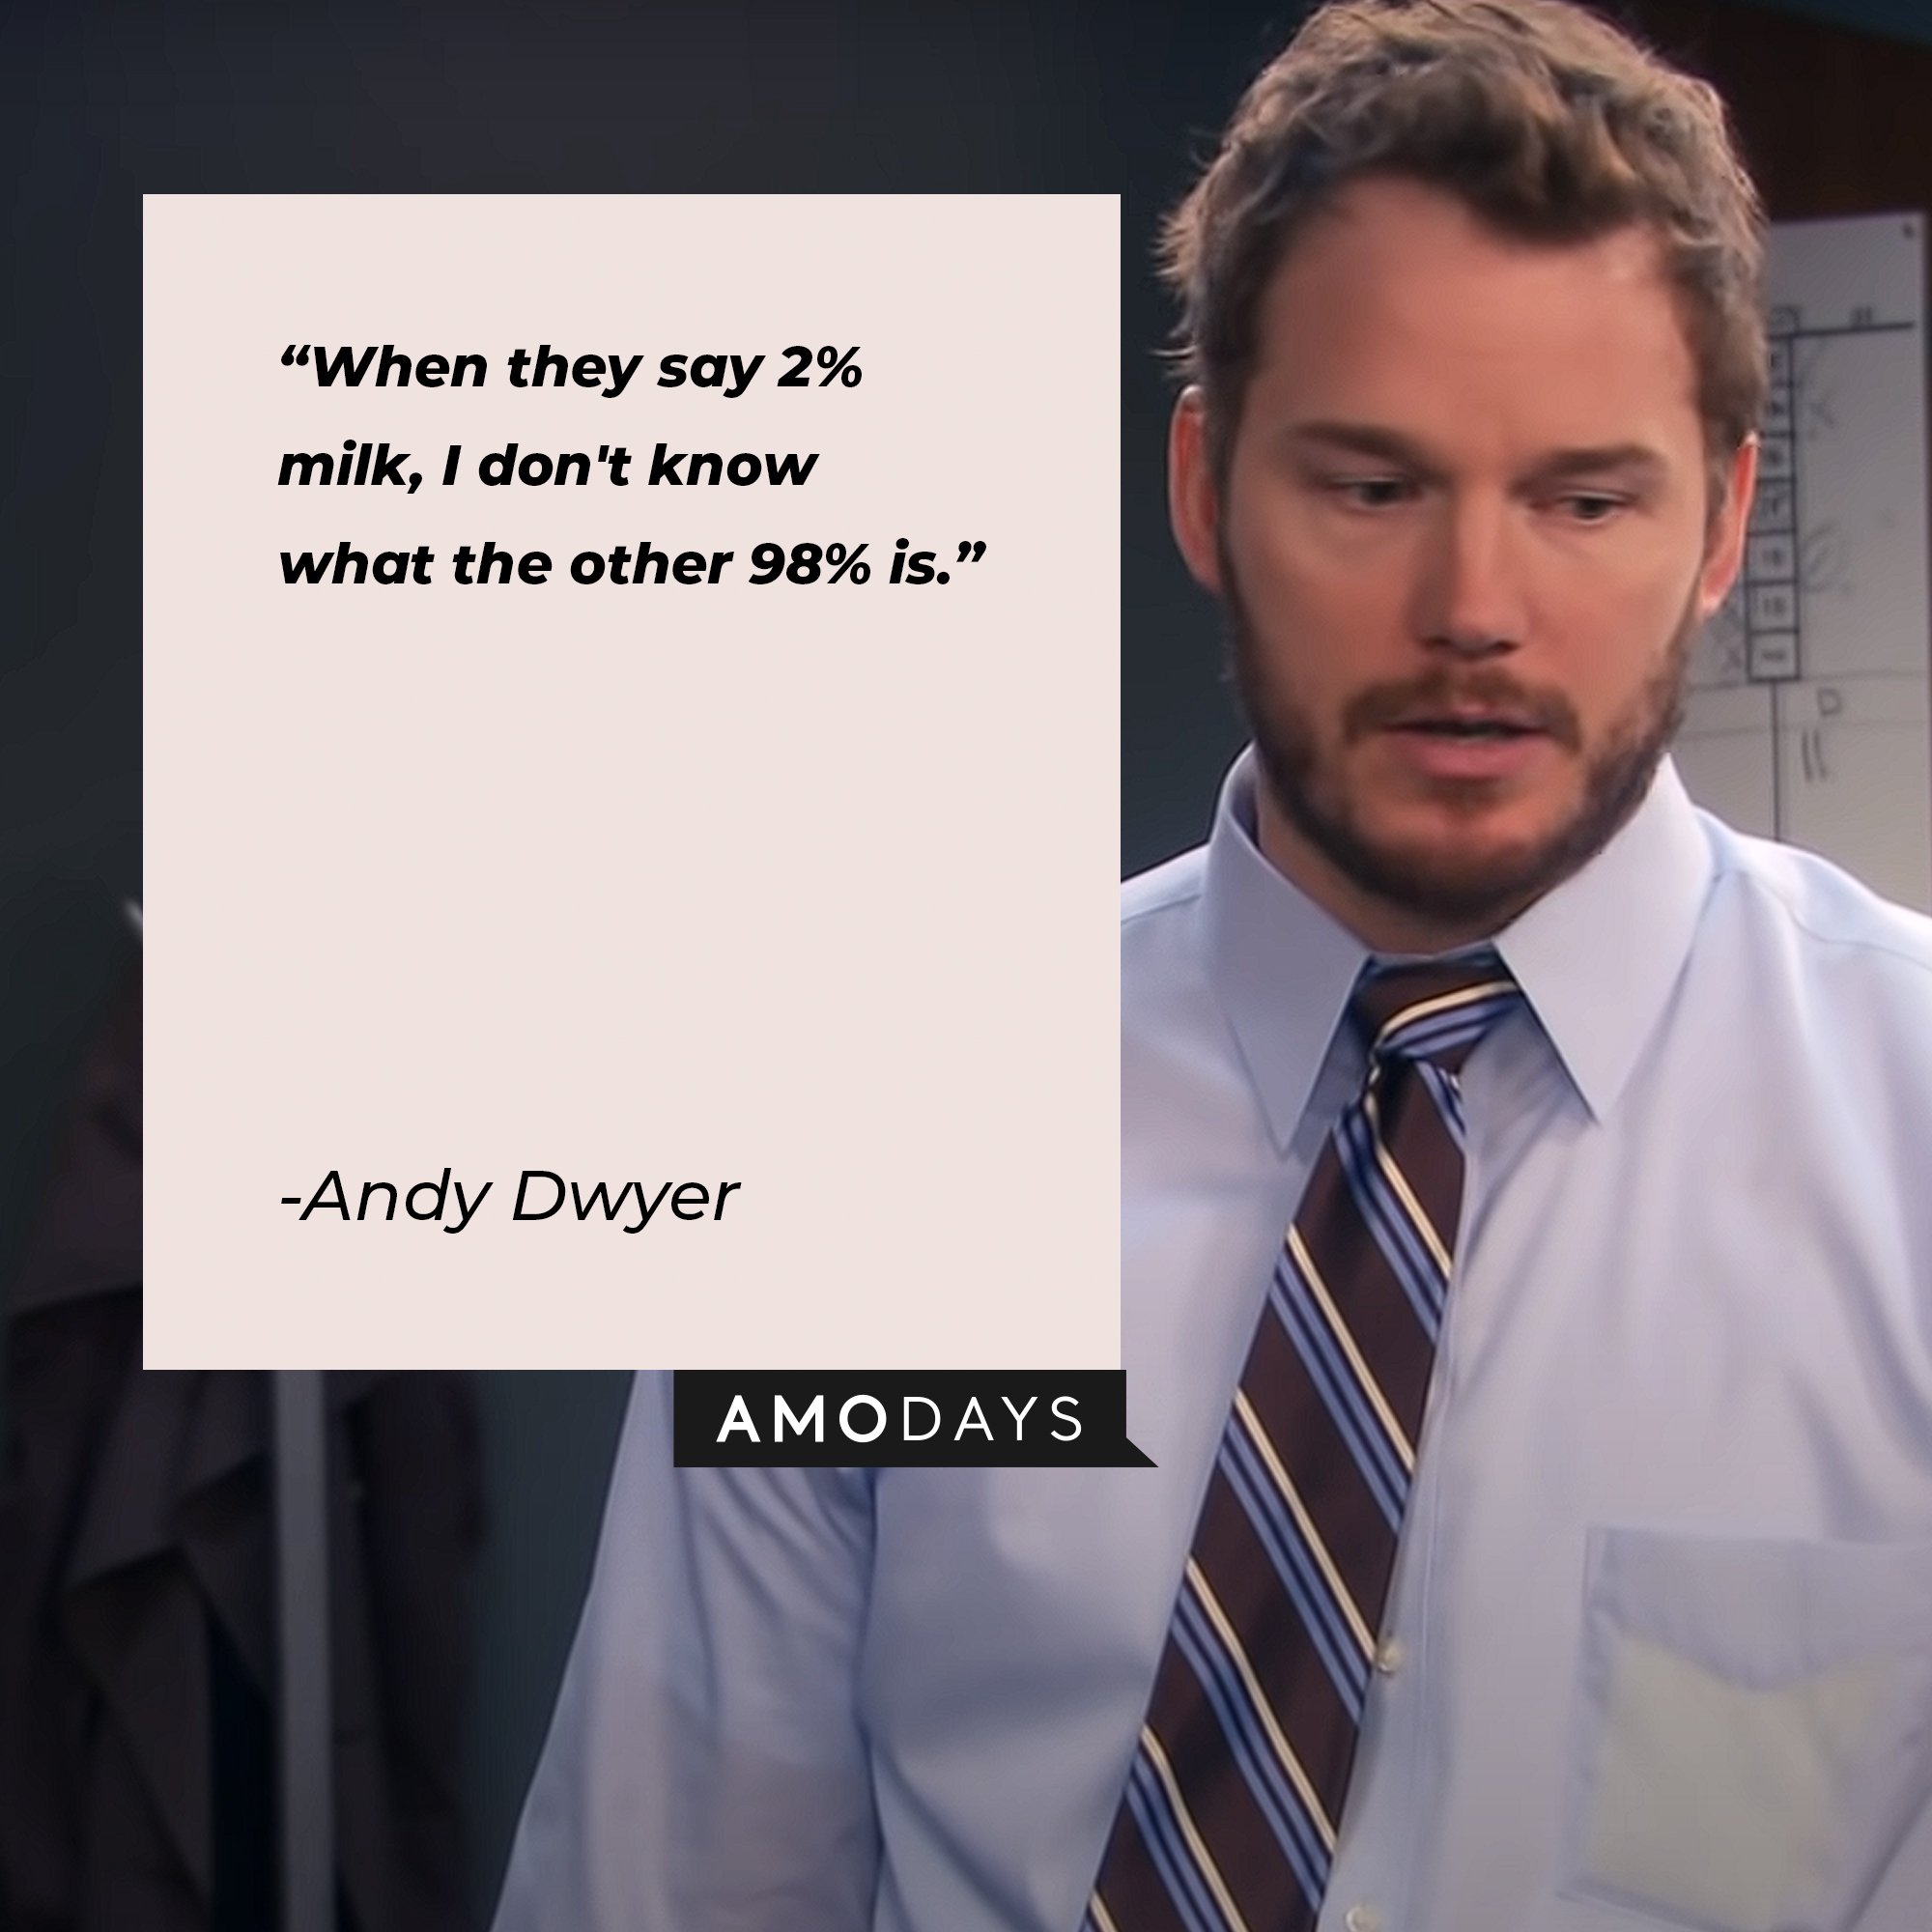 "When they say 2% milk, I don't know what the other 98% is." | Source: youtube.com/ParksandRecreation